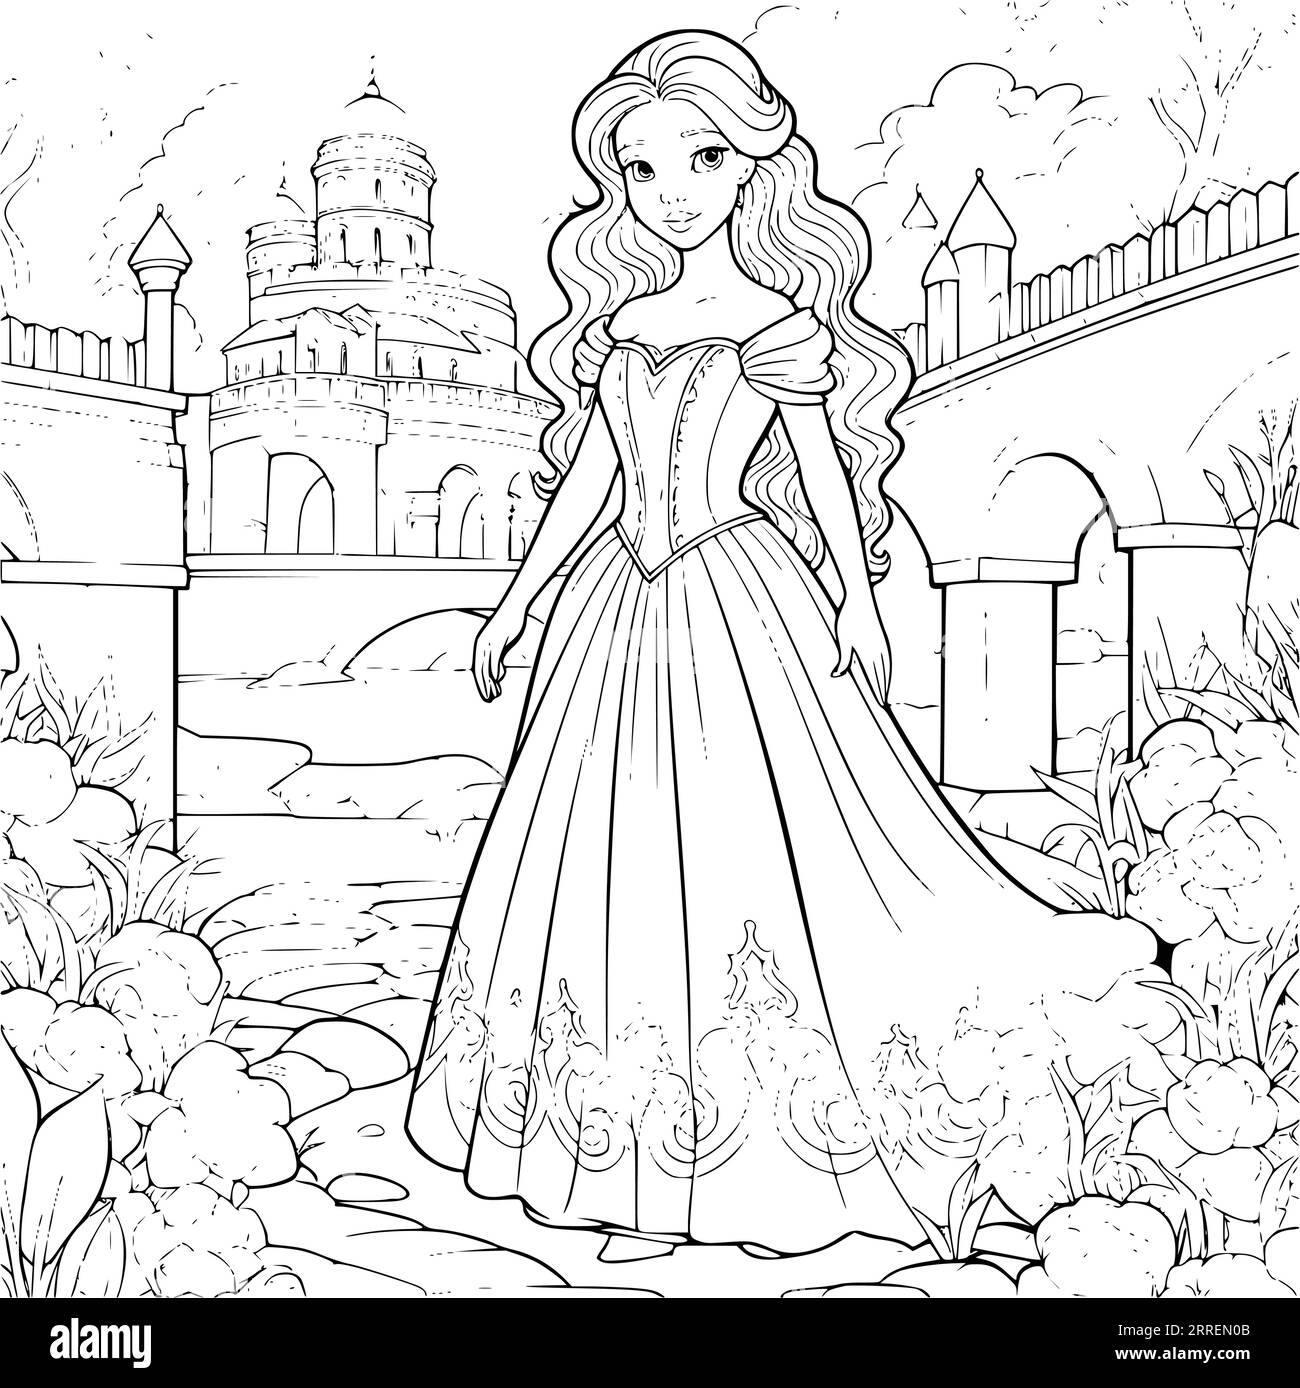 Beautiful Princess In Garden Coloring Pages Drawing For Kids Stock Vector